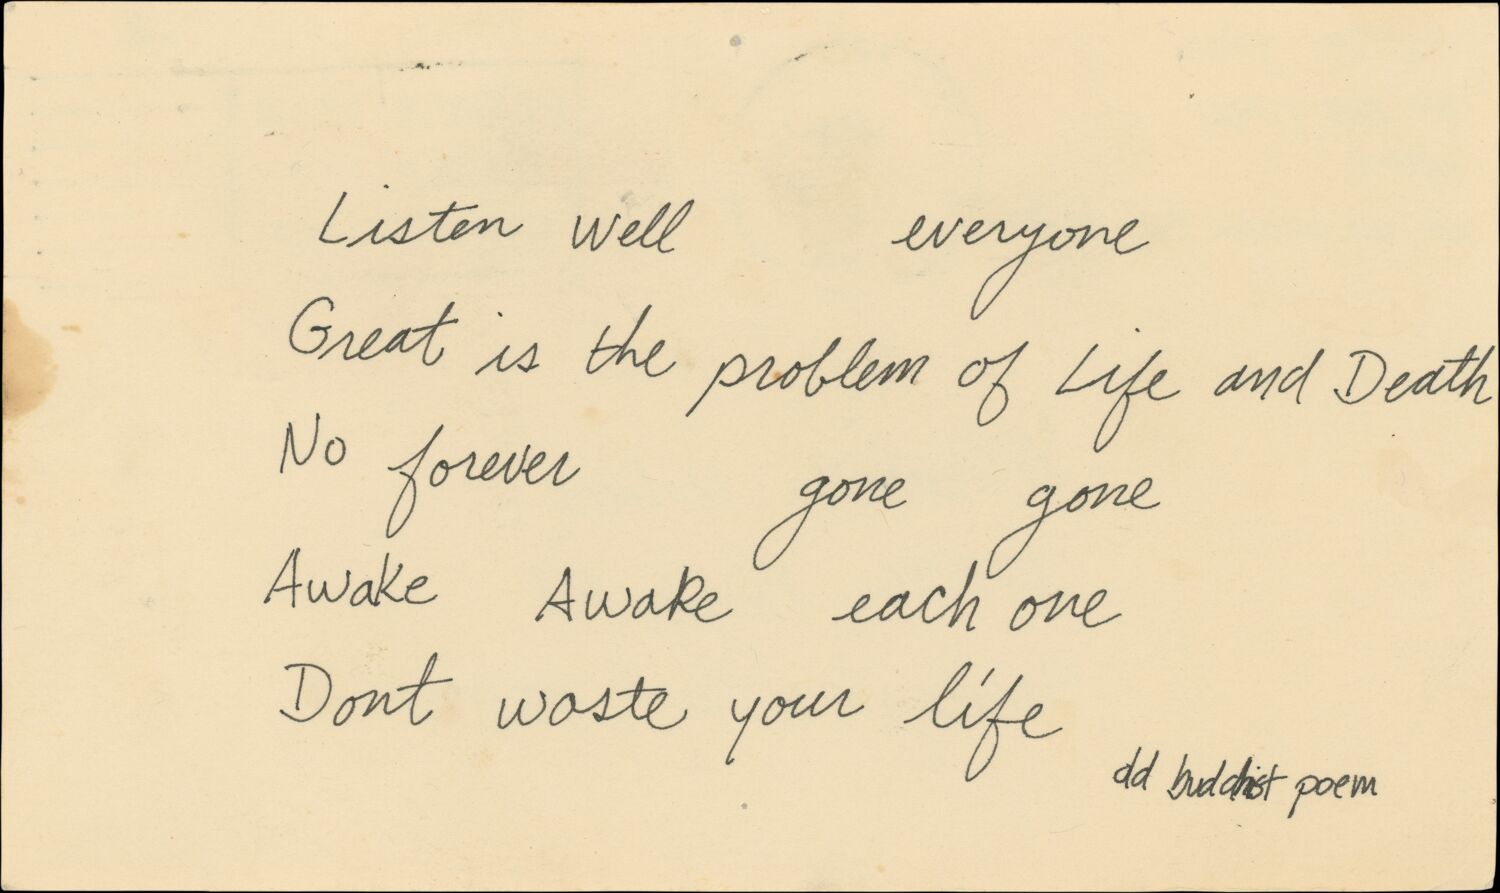 A yellowing postcard with a Buddhist poem handwritten by Steve. The last line reads: Dont waste your life.